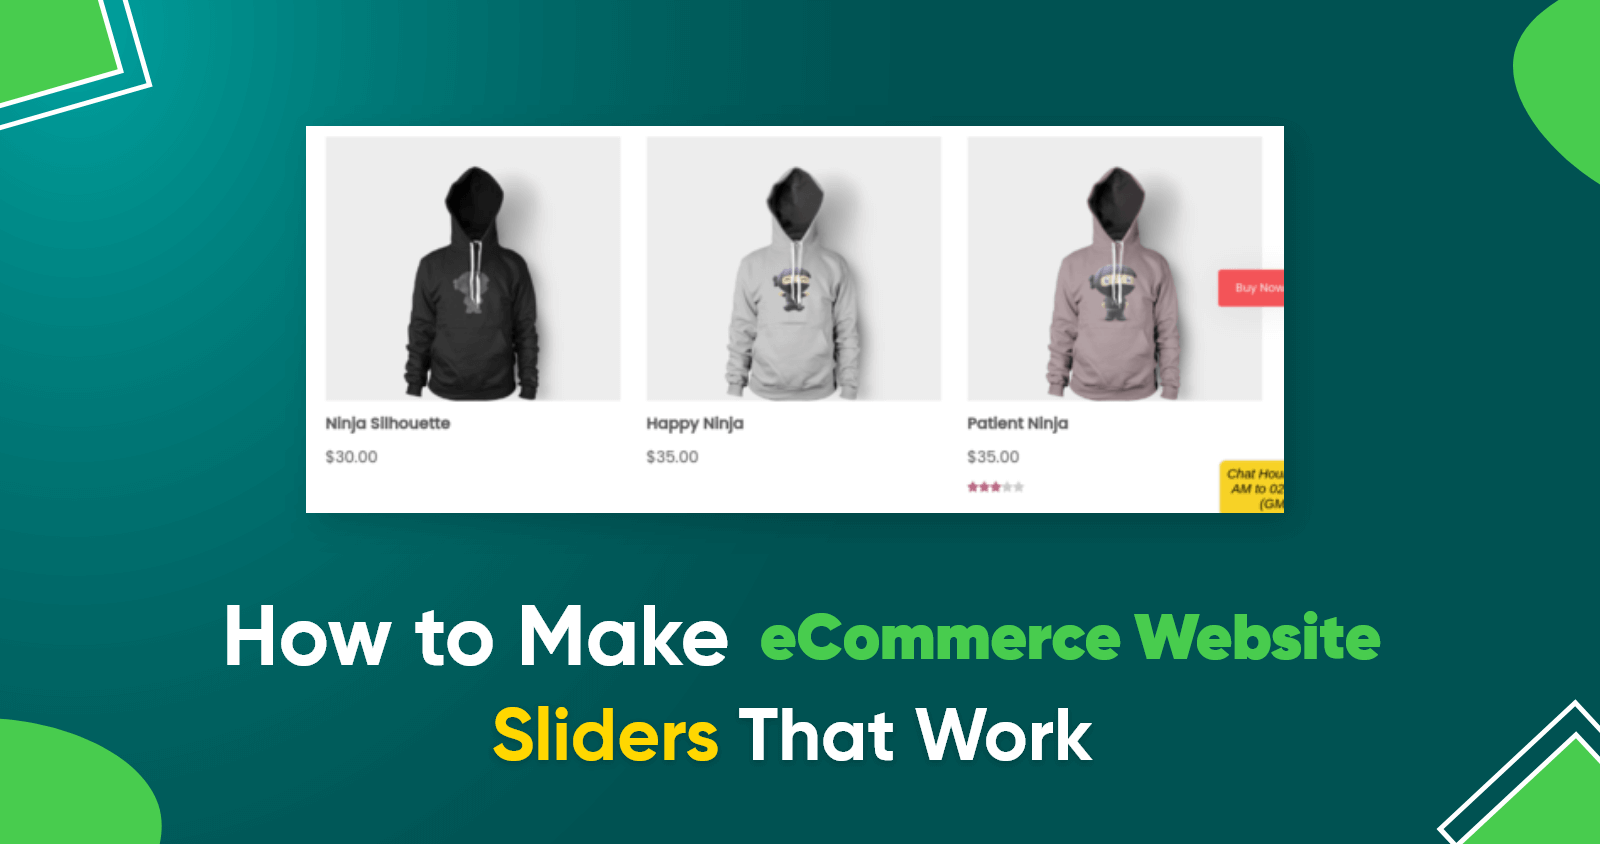 How to Make Ecommerce Website Sliders That Work